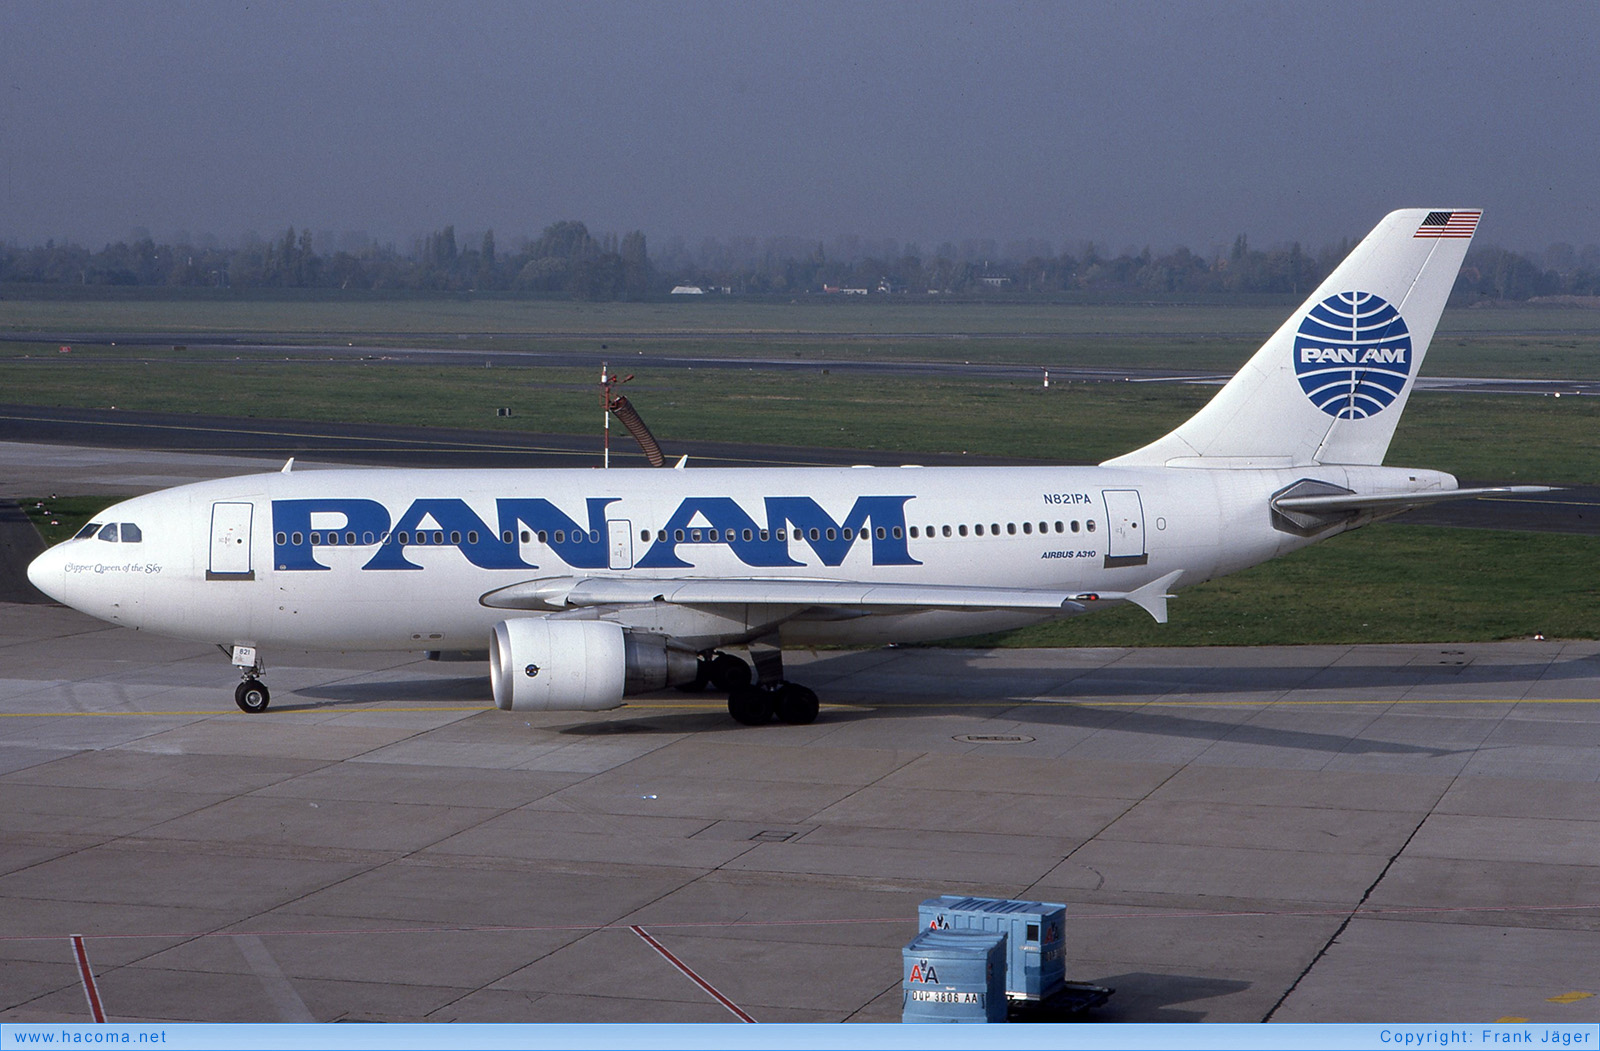 Photo of N821PA - Pan Am Clipper Queen of the Skies - Dusseldorf Airport - Oct 27, 1989